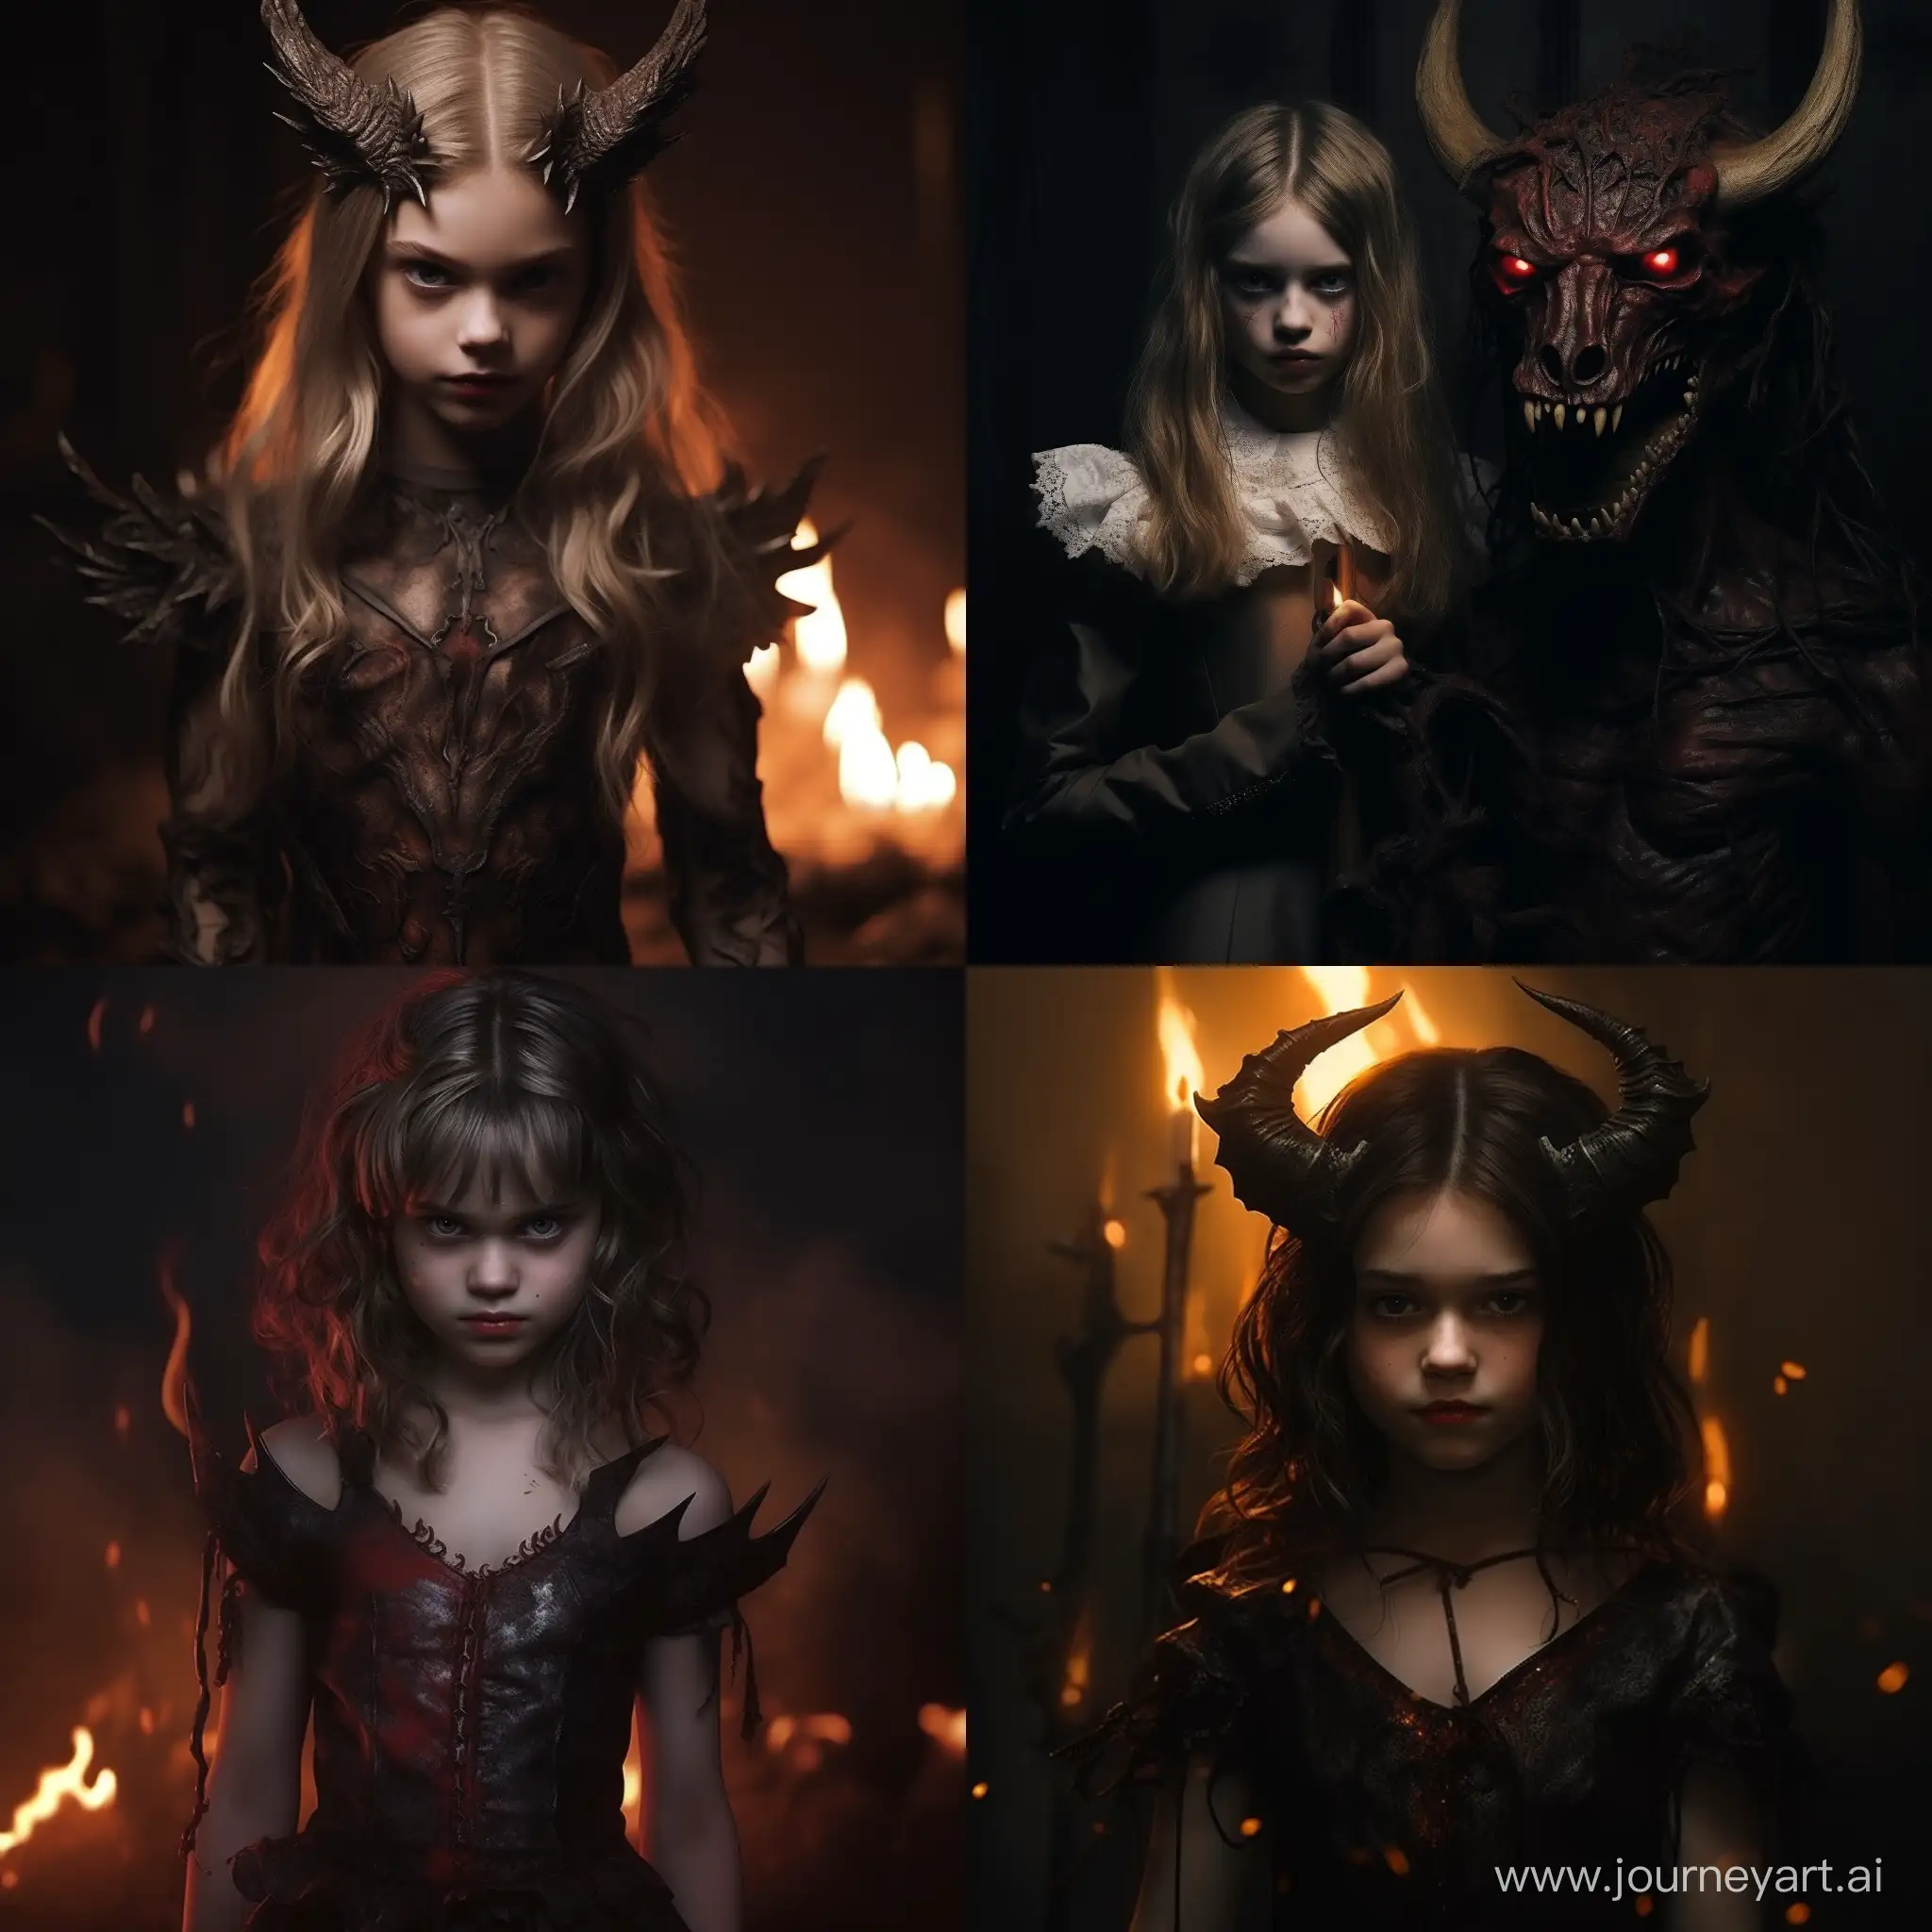 ﻿@Midjourney ﻿ a little Demon girl called Lucan she is the daughter of the grand devil in the hell